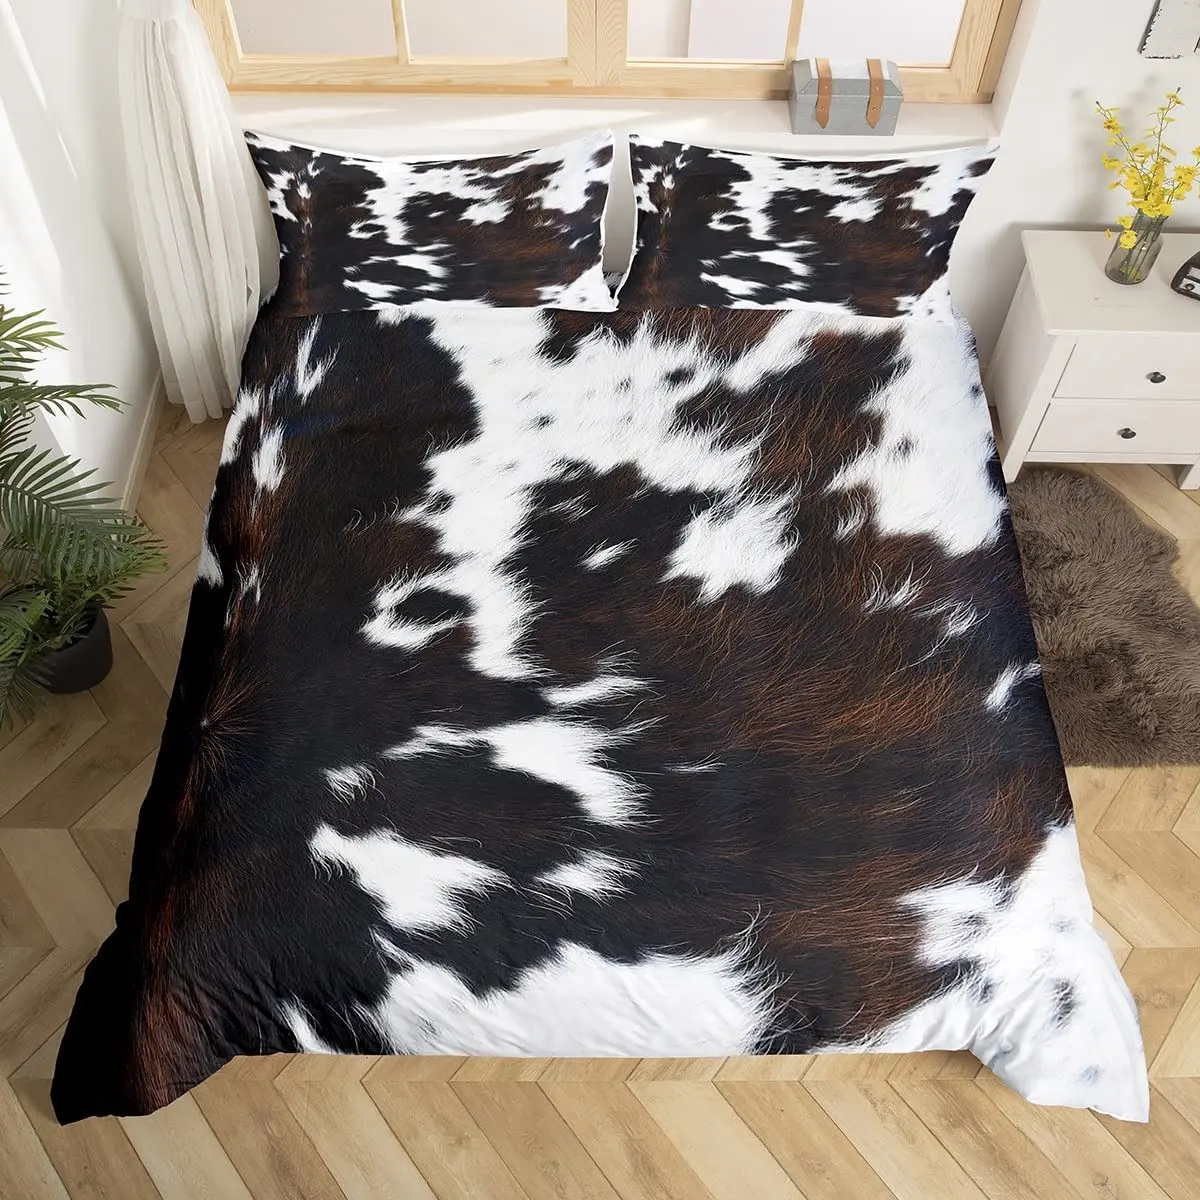 Cowhide Duvet Cover Brown Cow Print Bedding ,Western Rustic Farmhouse Farm Animal Bedding Sets Highland Cow Fur Comforter Cover